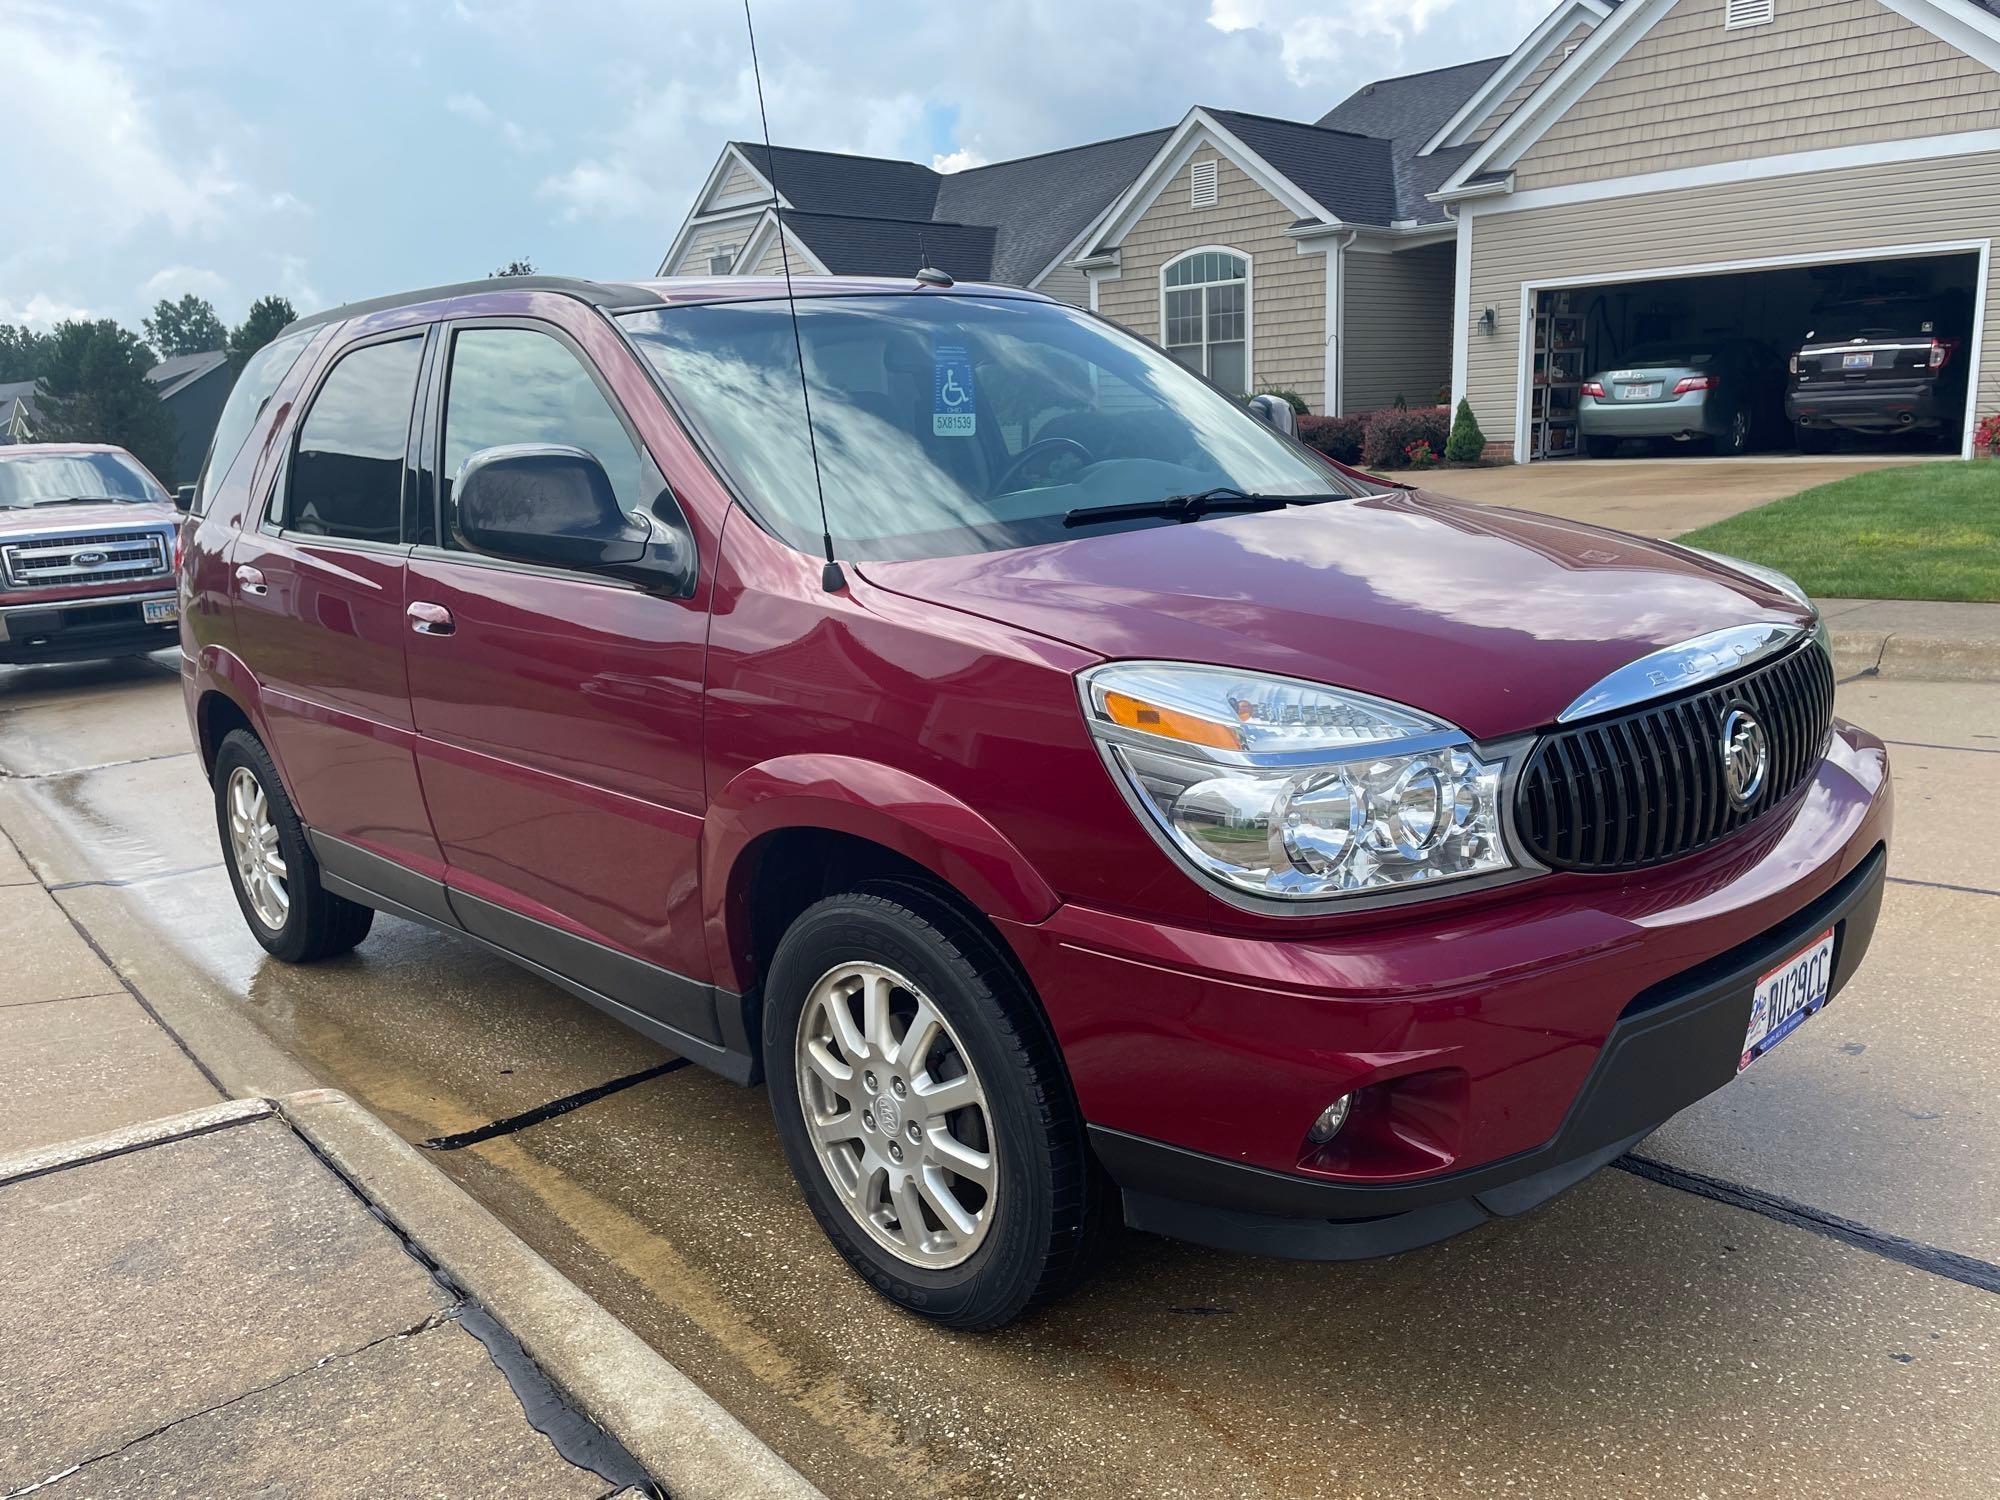 2007 Buick Rendezvous CXL - Only 62,807mi - automatic trans. - 3.5L 6cyc engine